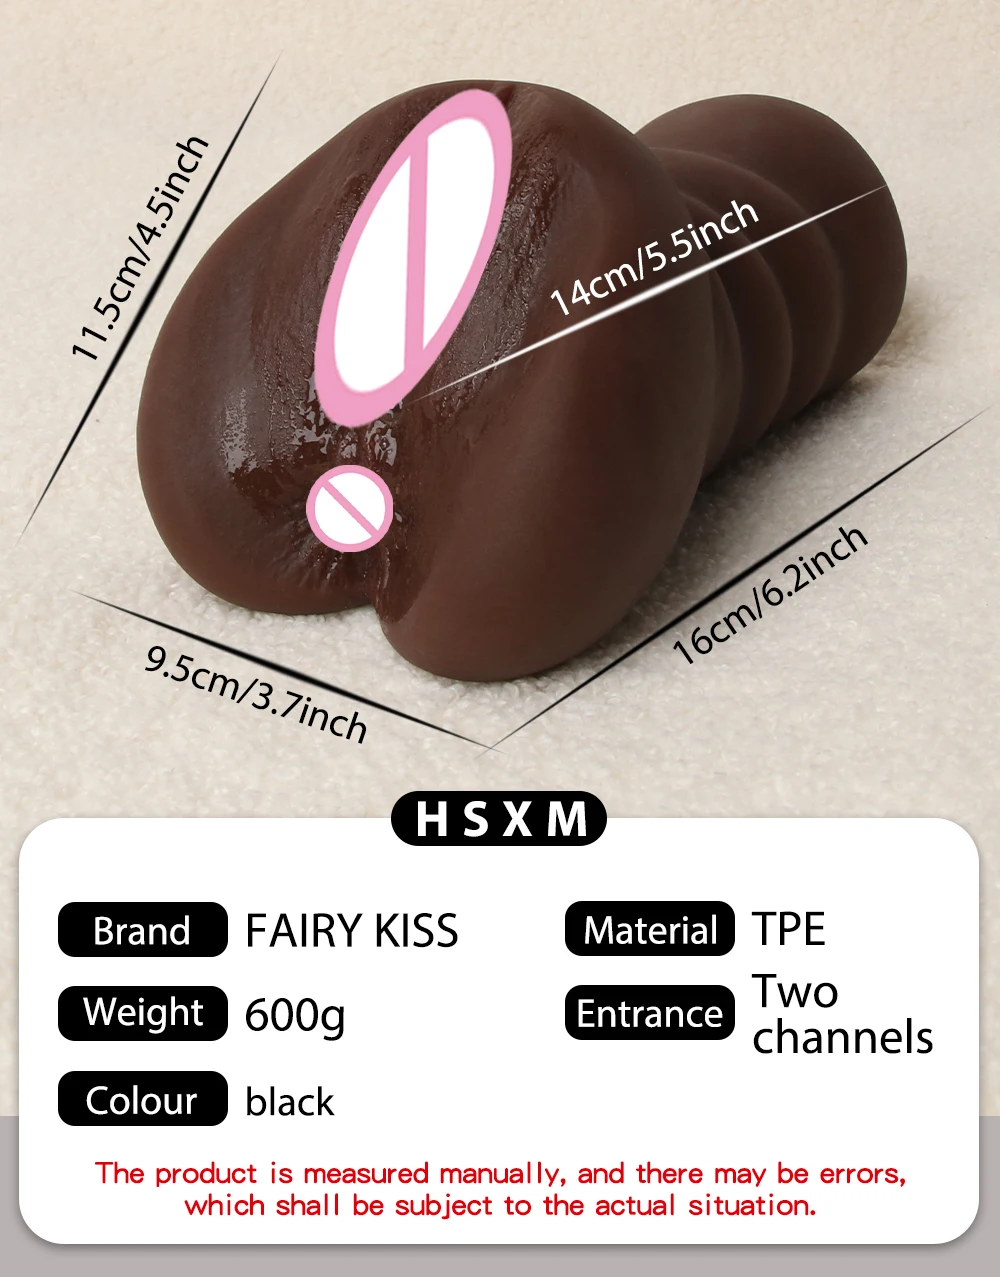 Vagina Real Pussy Male Masturbator Goods For Adults Realistic Silicone Sexy Vaginal Pocket Pusssy Masturbation Sex Toys For Men H9d2832ca23ac447fa0c1600d026bb9c8Z